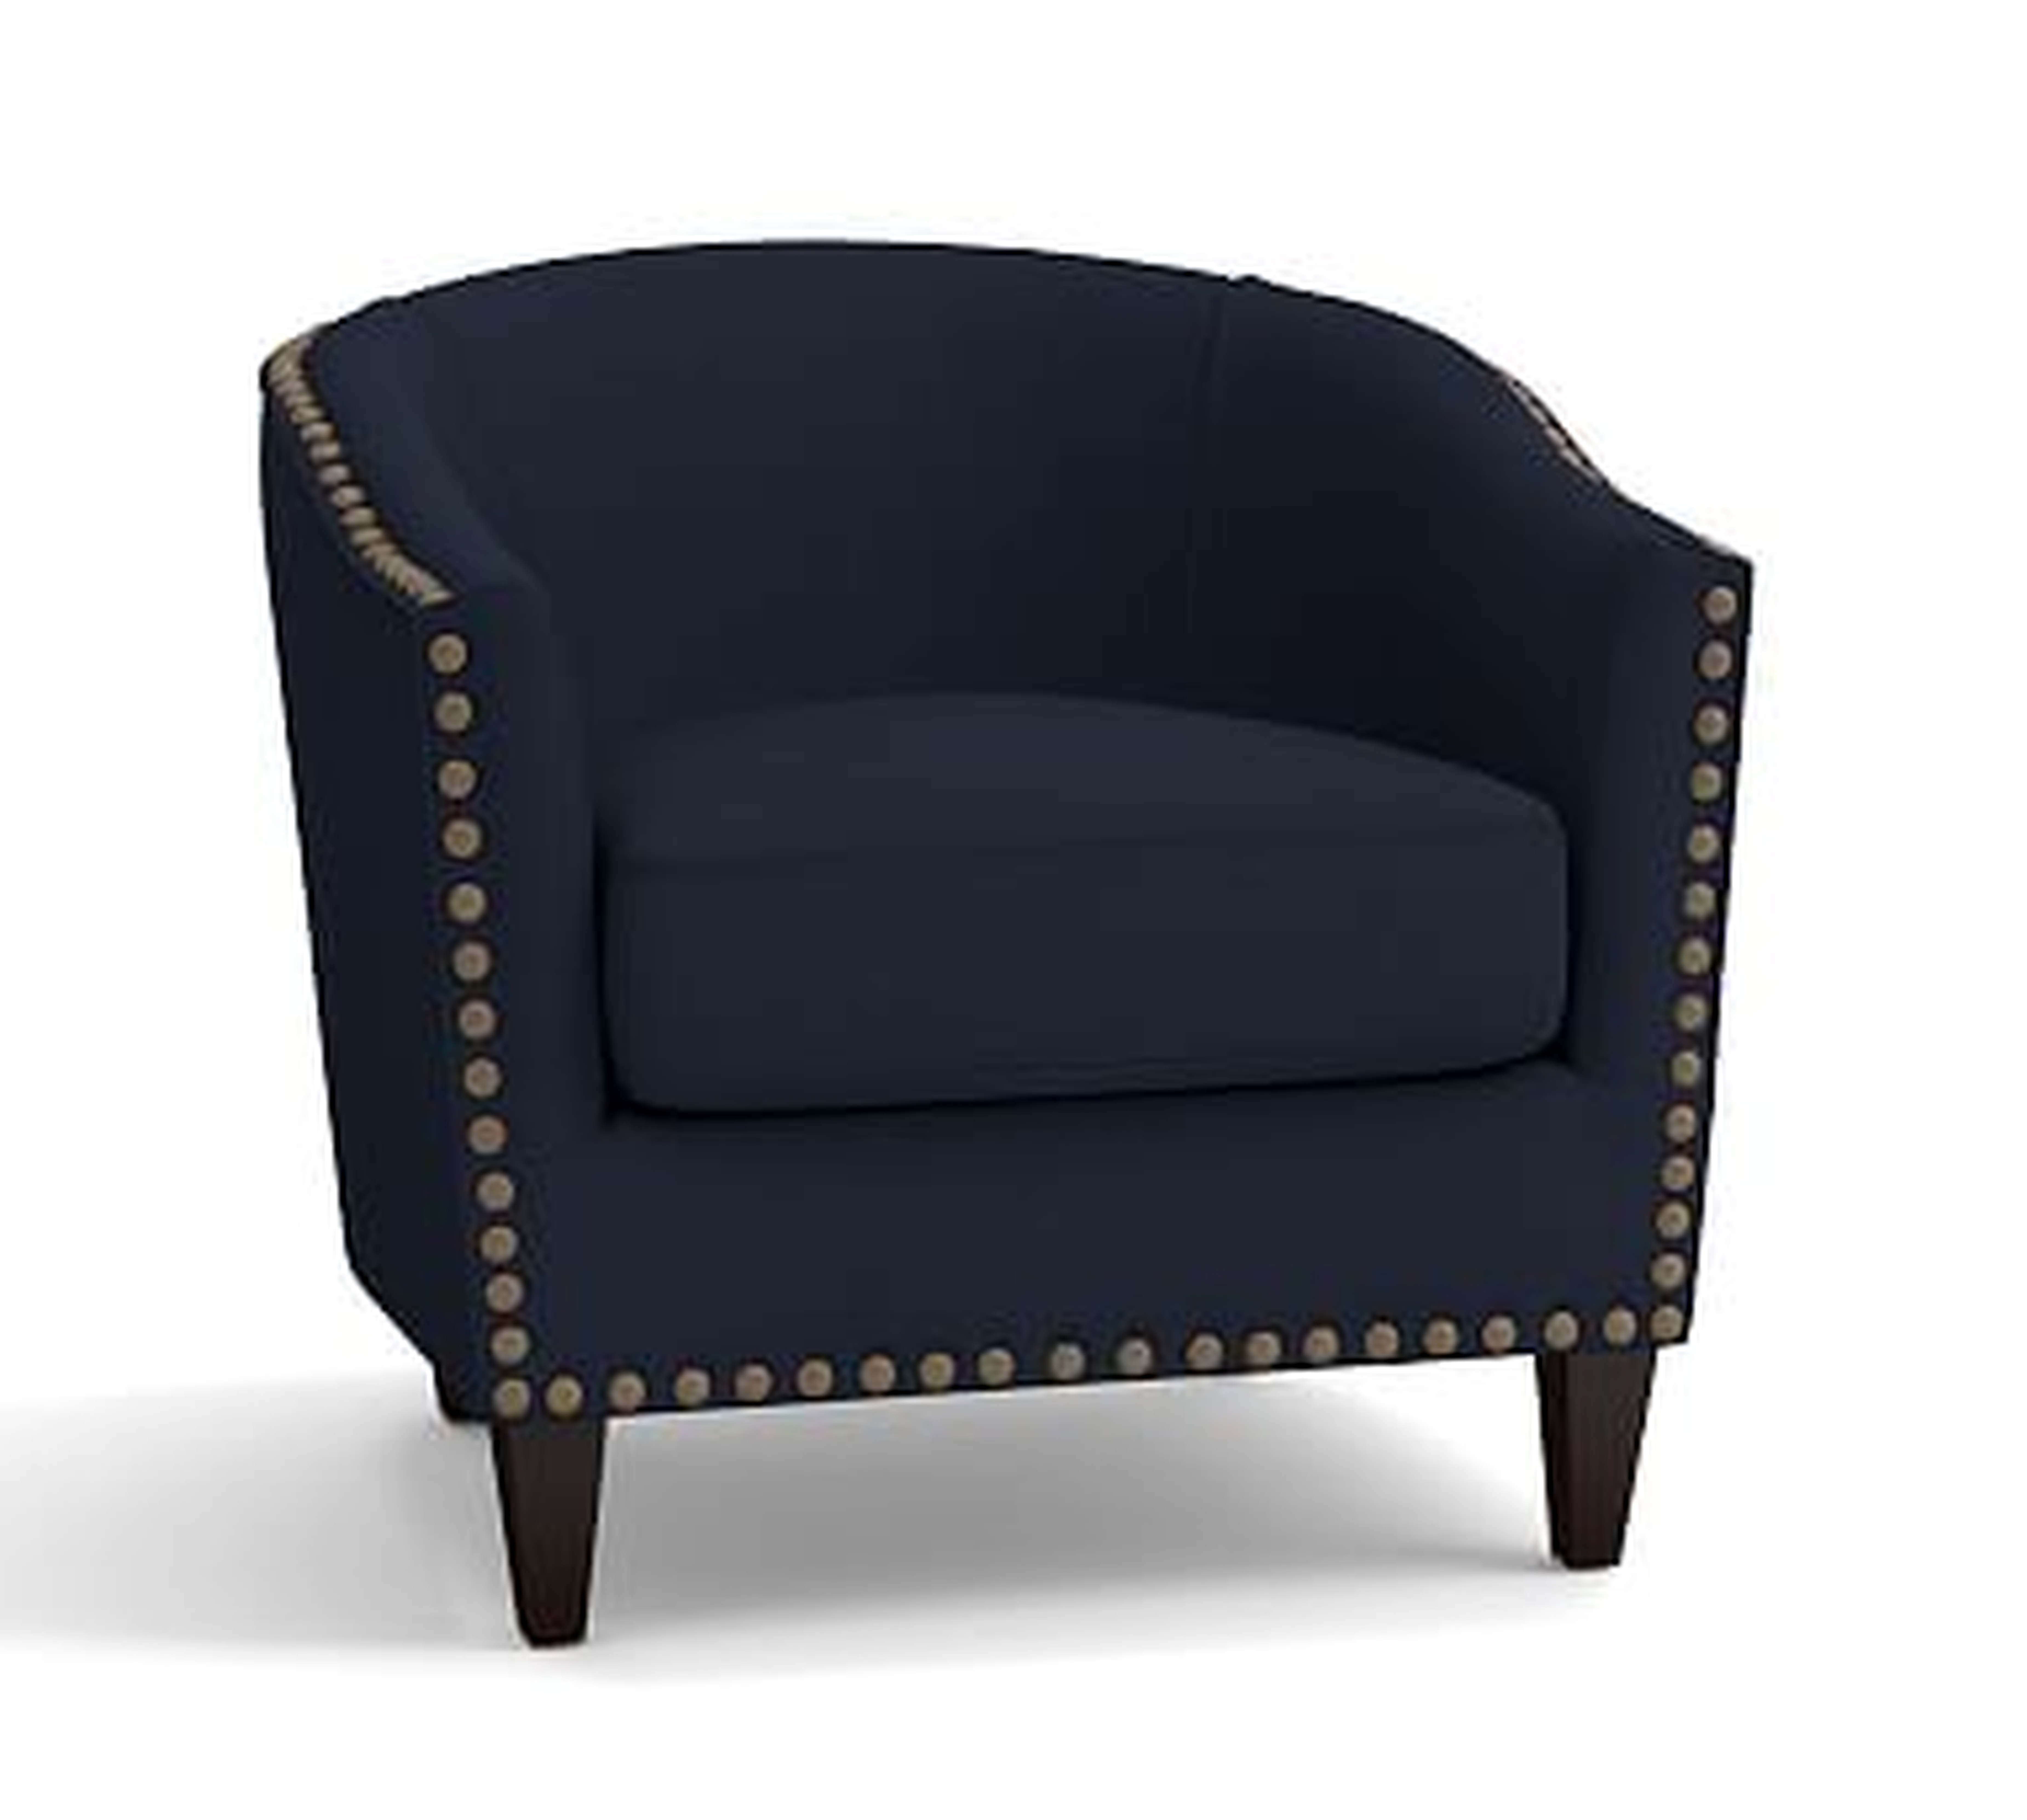 Harlow Upholstered Armchair with Bronze Nailheads, Polyester Wrapped Cushions, Twill Cadet Navy - Pottery Barn